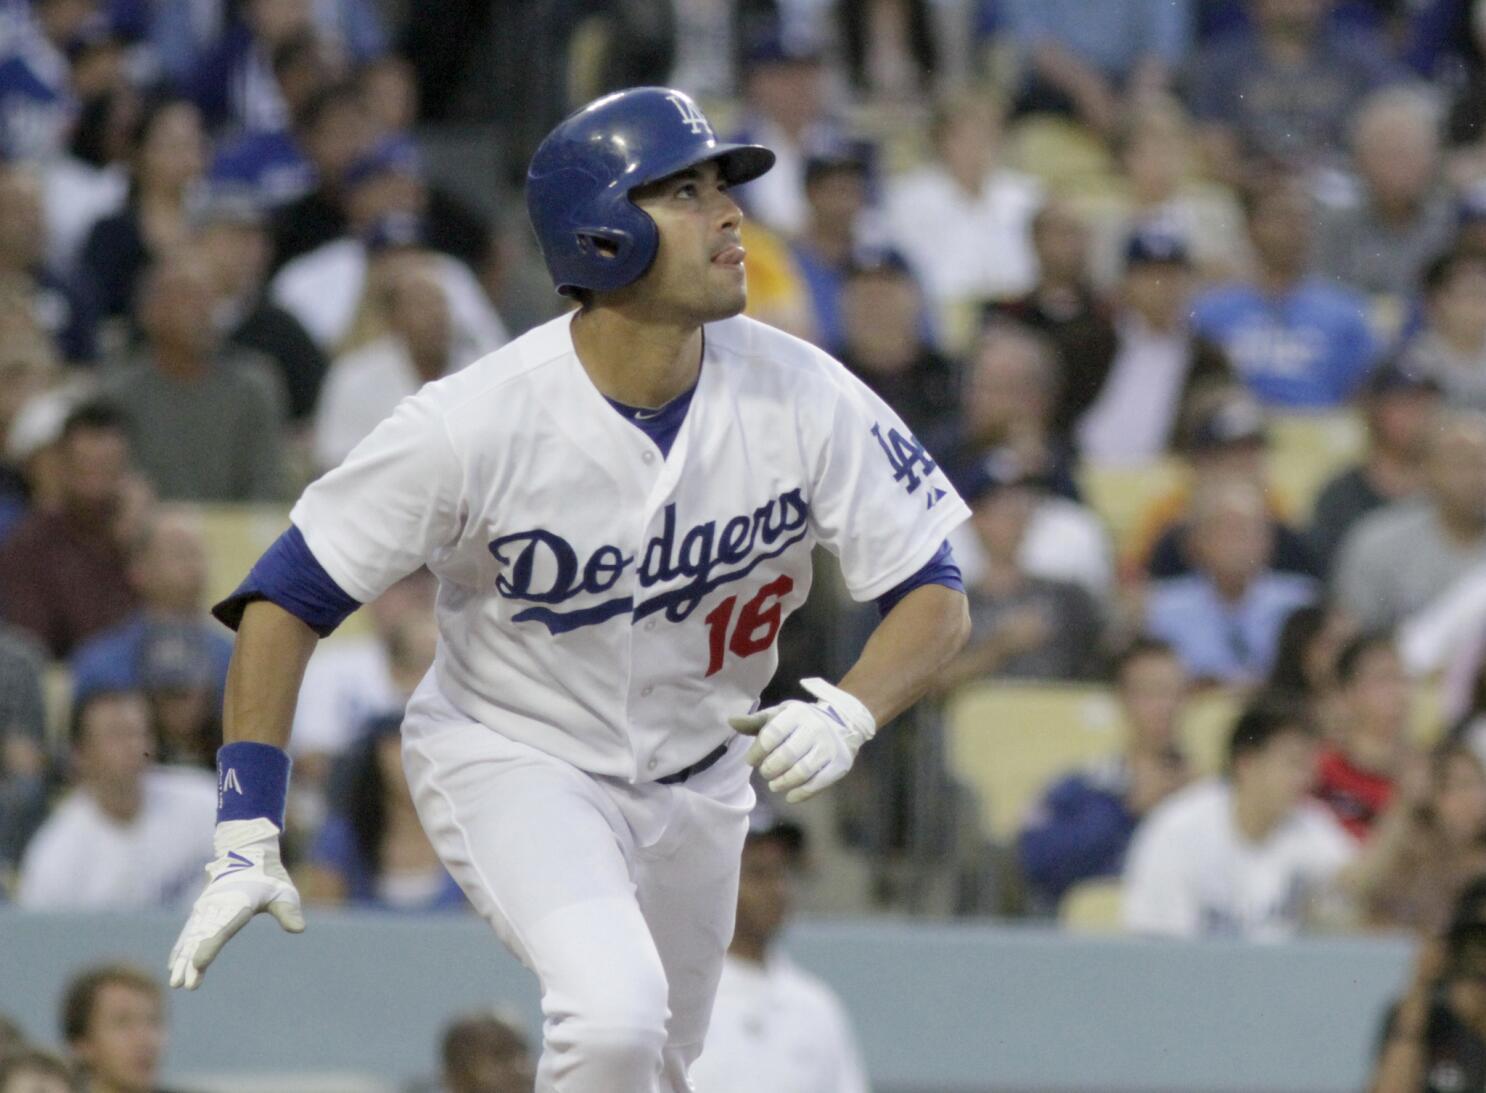 Source: Dodgers' trade of Ethier to D-backs falls through